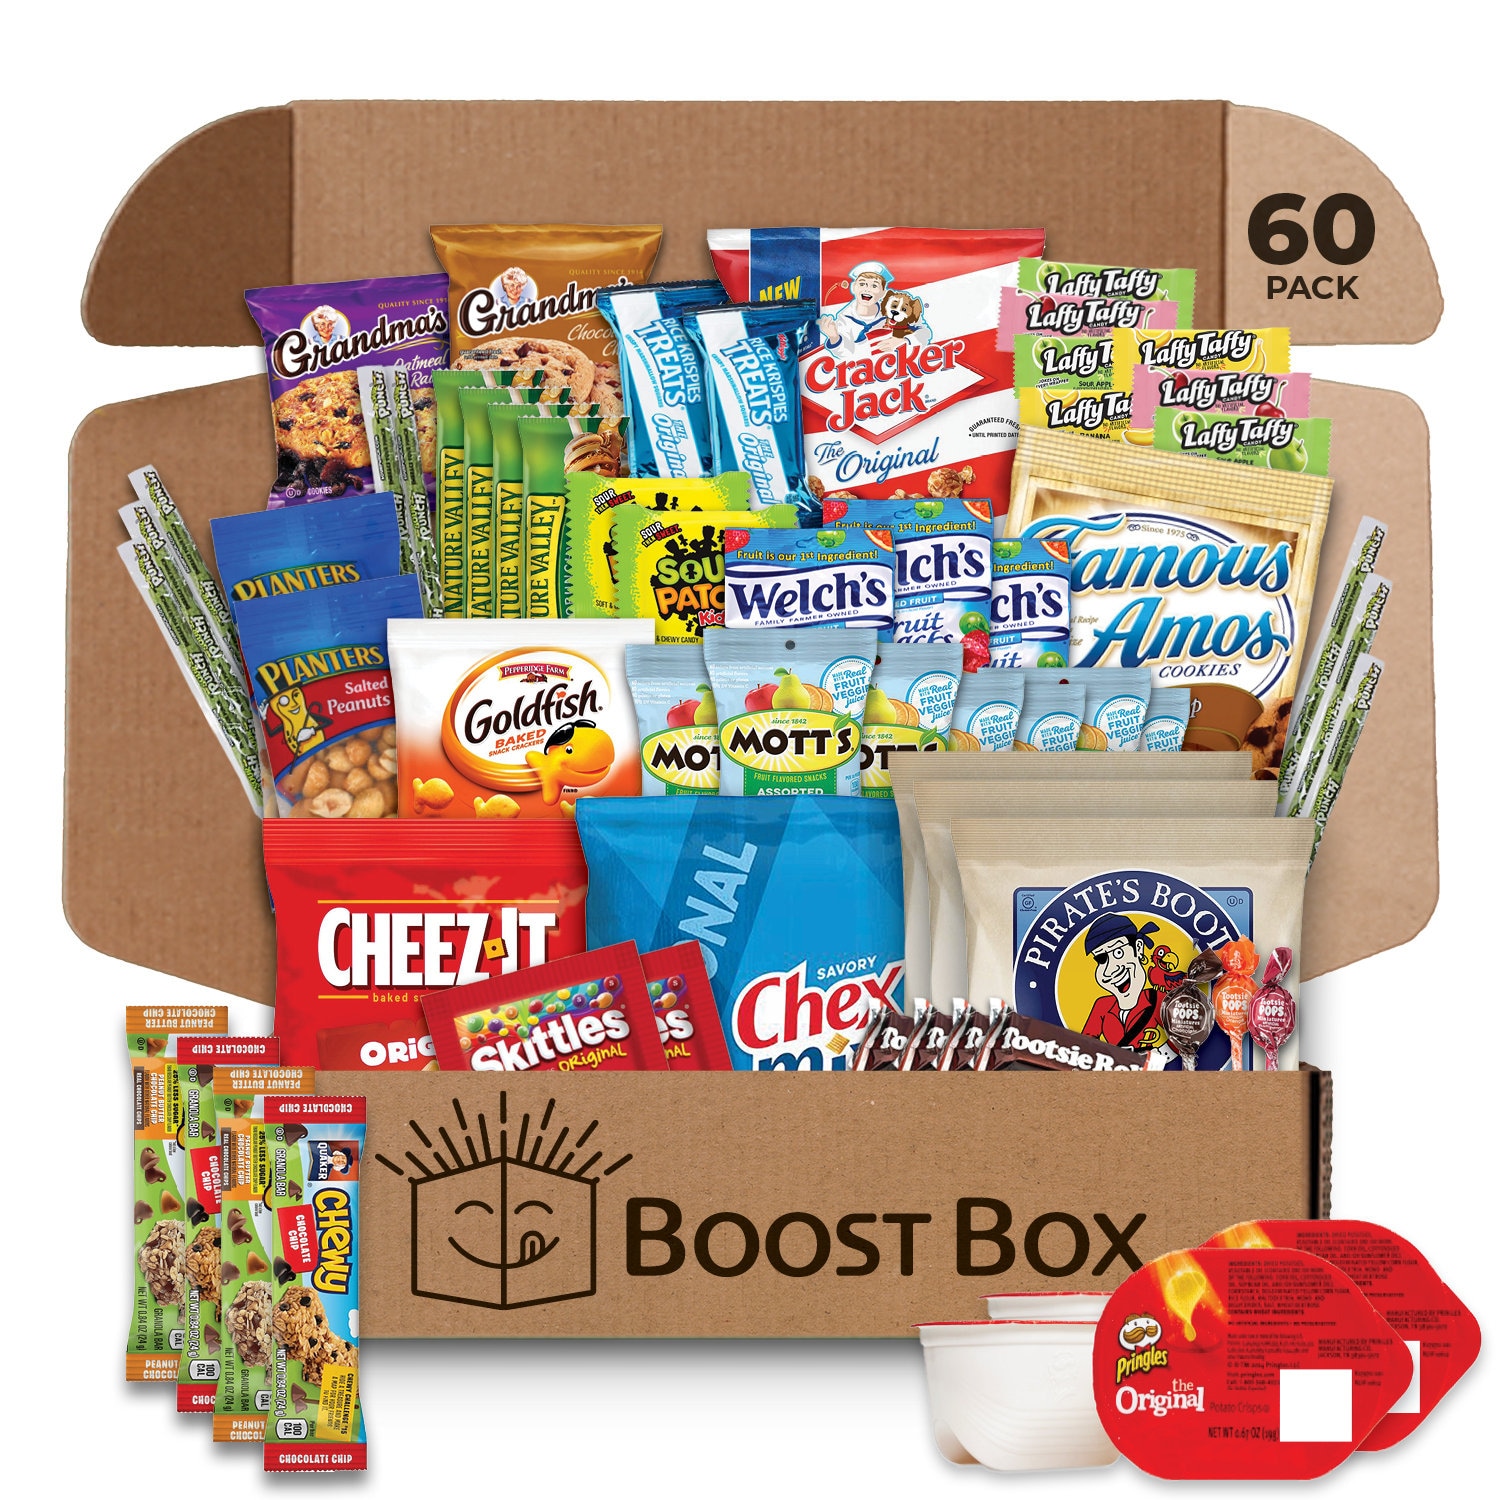 Snack Box Care Package (150) Variety Snacks Gift Box Bulk Snacks  -valentines day College Students, Military, Work or Home - Over 9 Pounds of  Snacks!